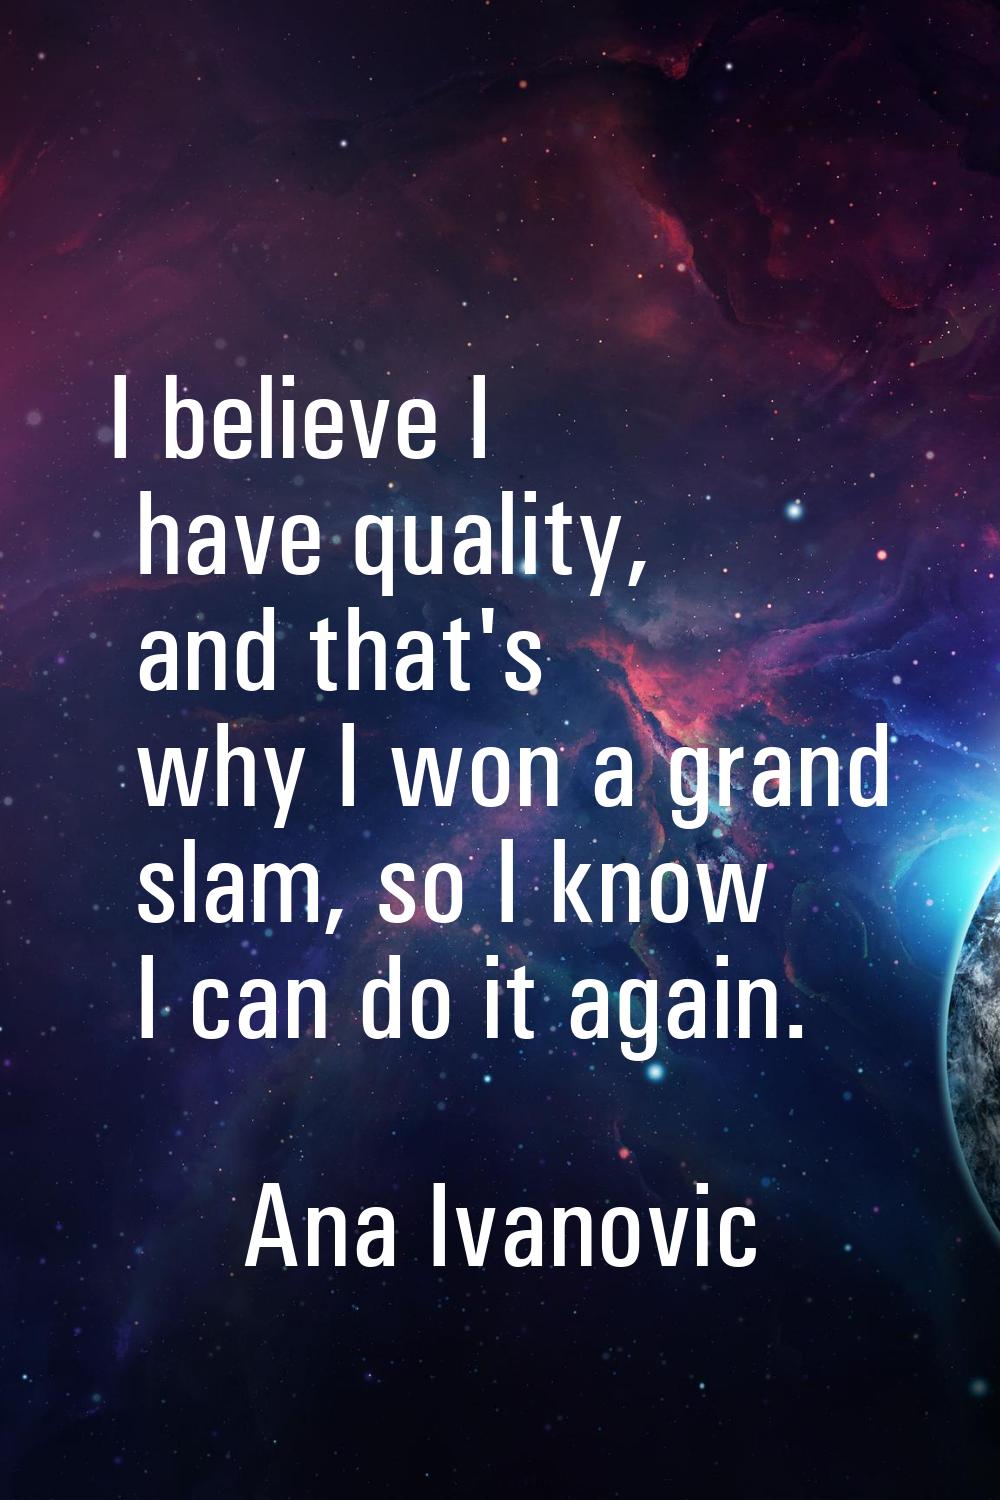 I believe I have quality, and that's why I won a grand slam, so I know I can do it again.